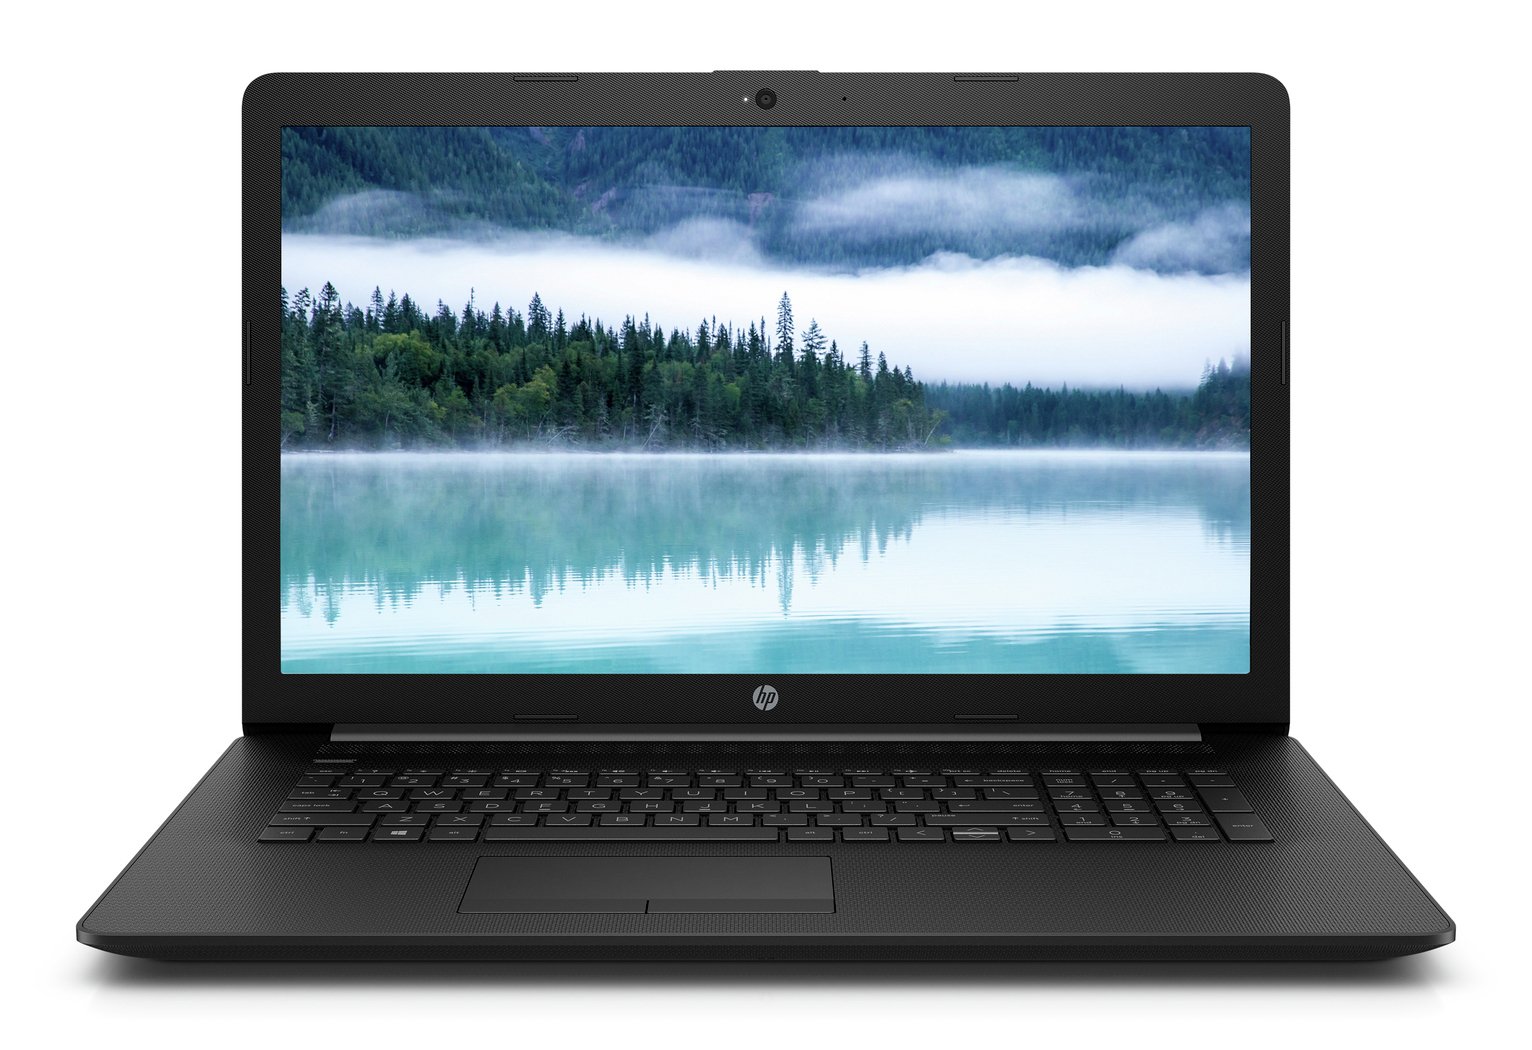 HP 17.3in Athlon 8GB 1TB Laptop Review